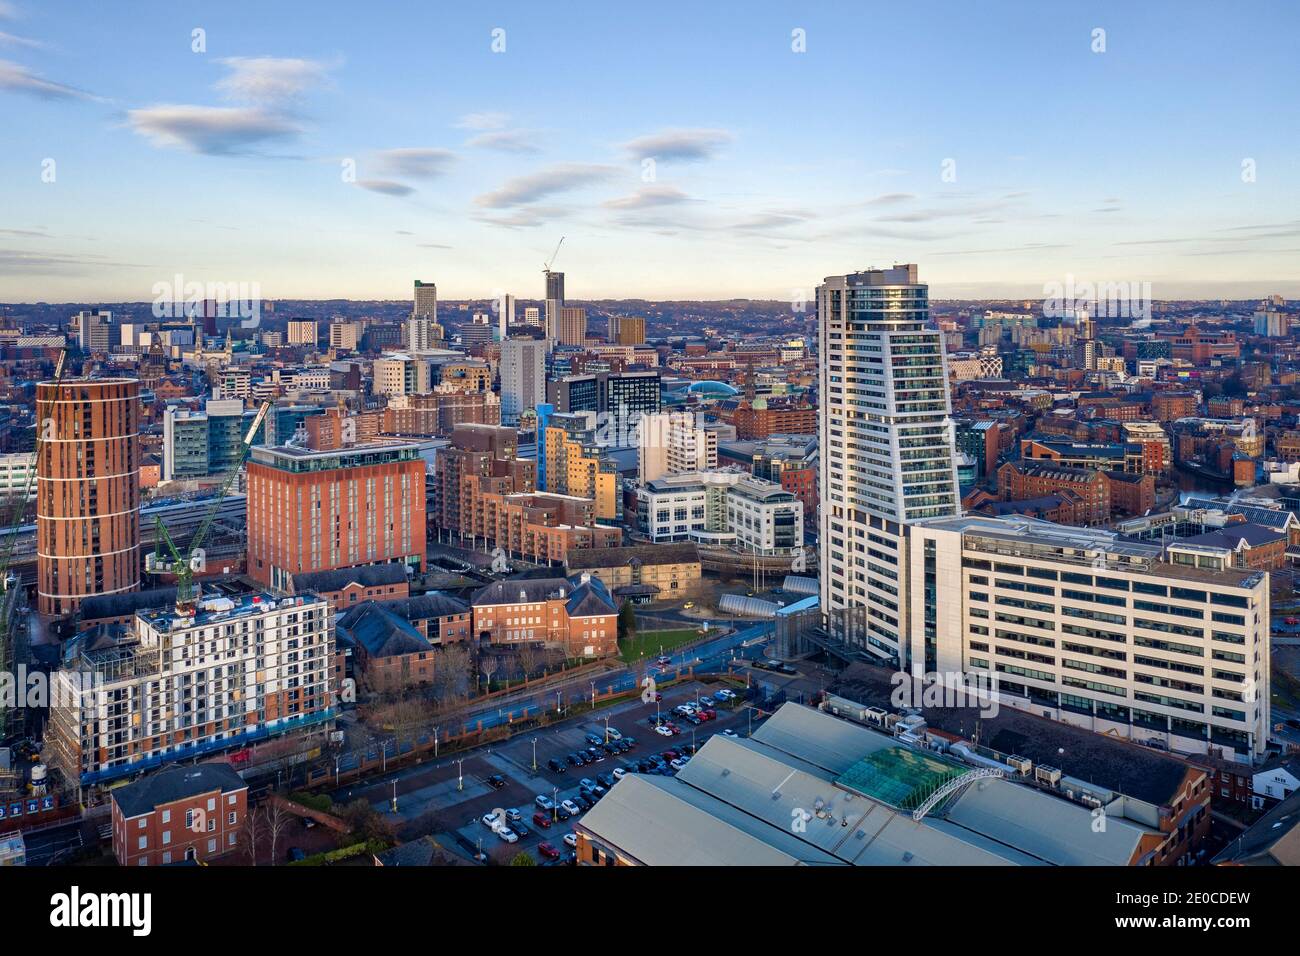 Leeds City Centre at dusk, aerial view from near Bridgewater Place looking back to the city centre, apartments, retail, hotels. Yorkshire, England Stock Photo